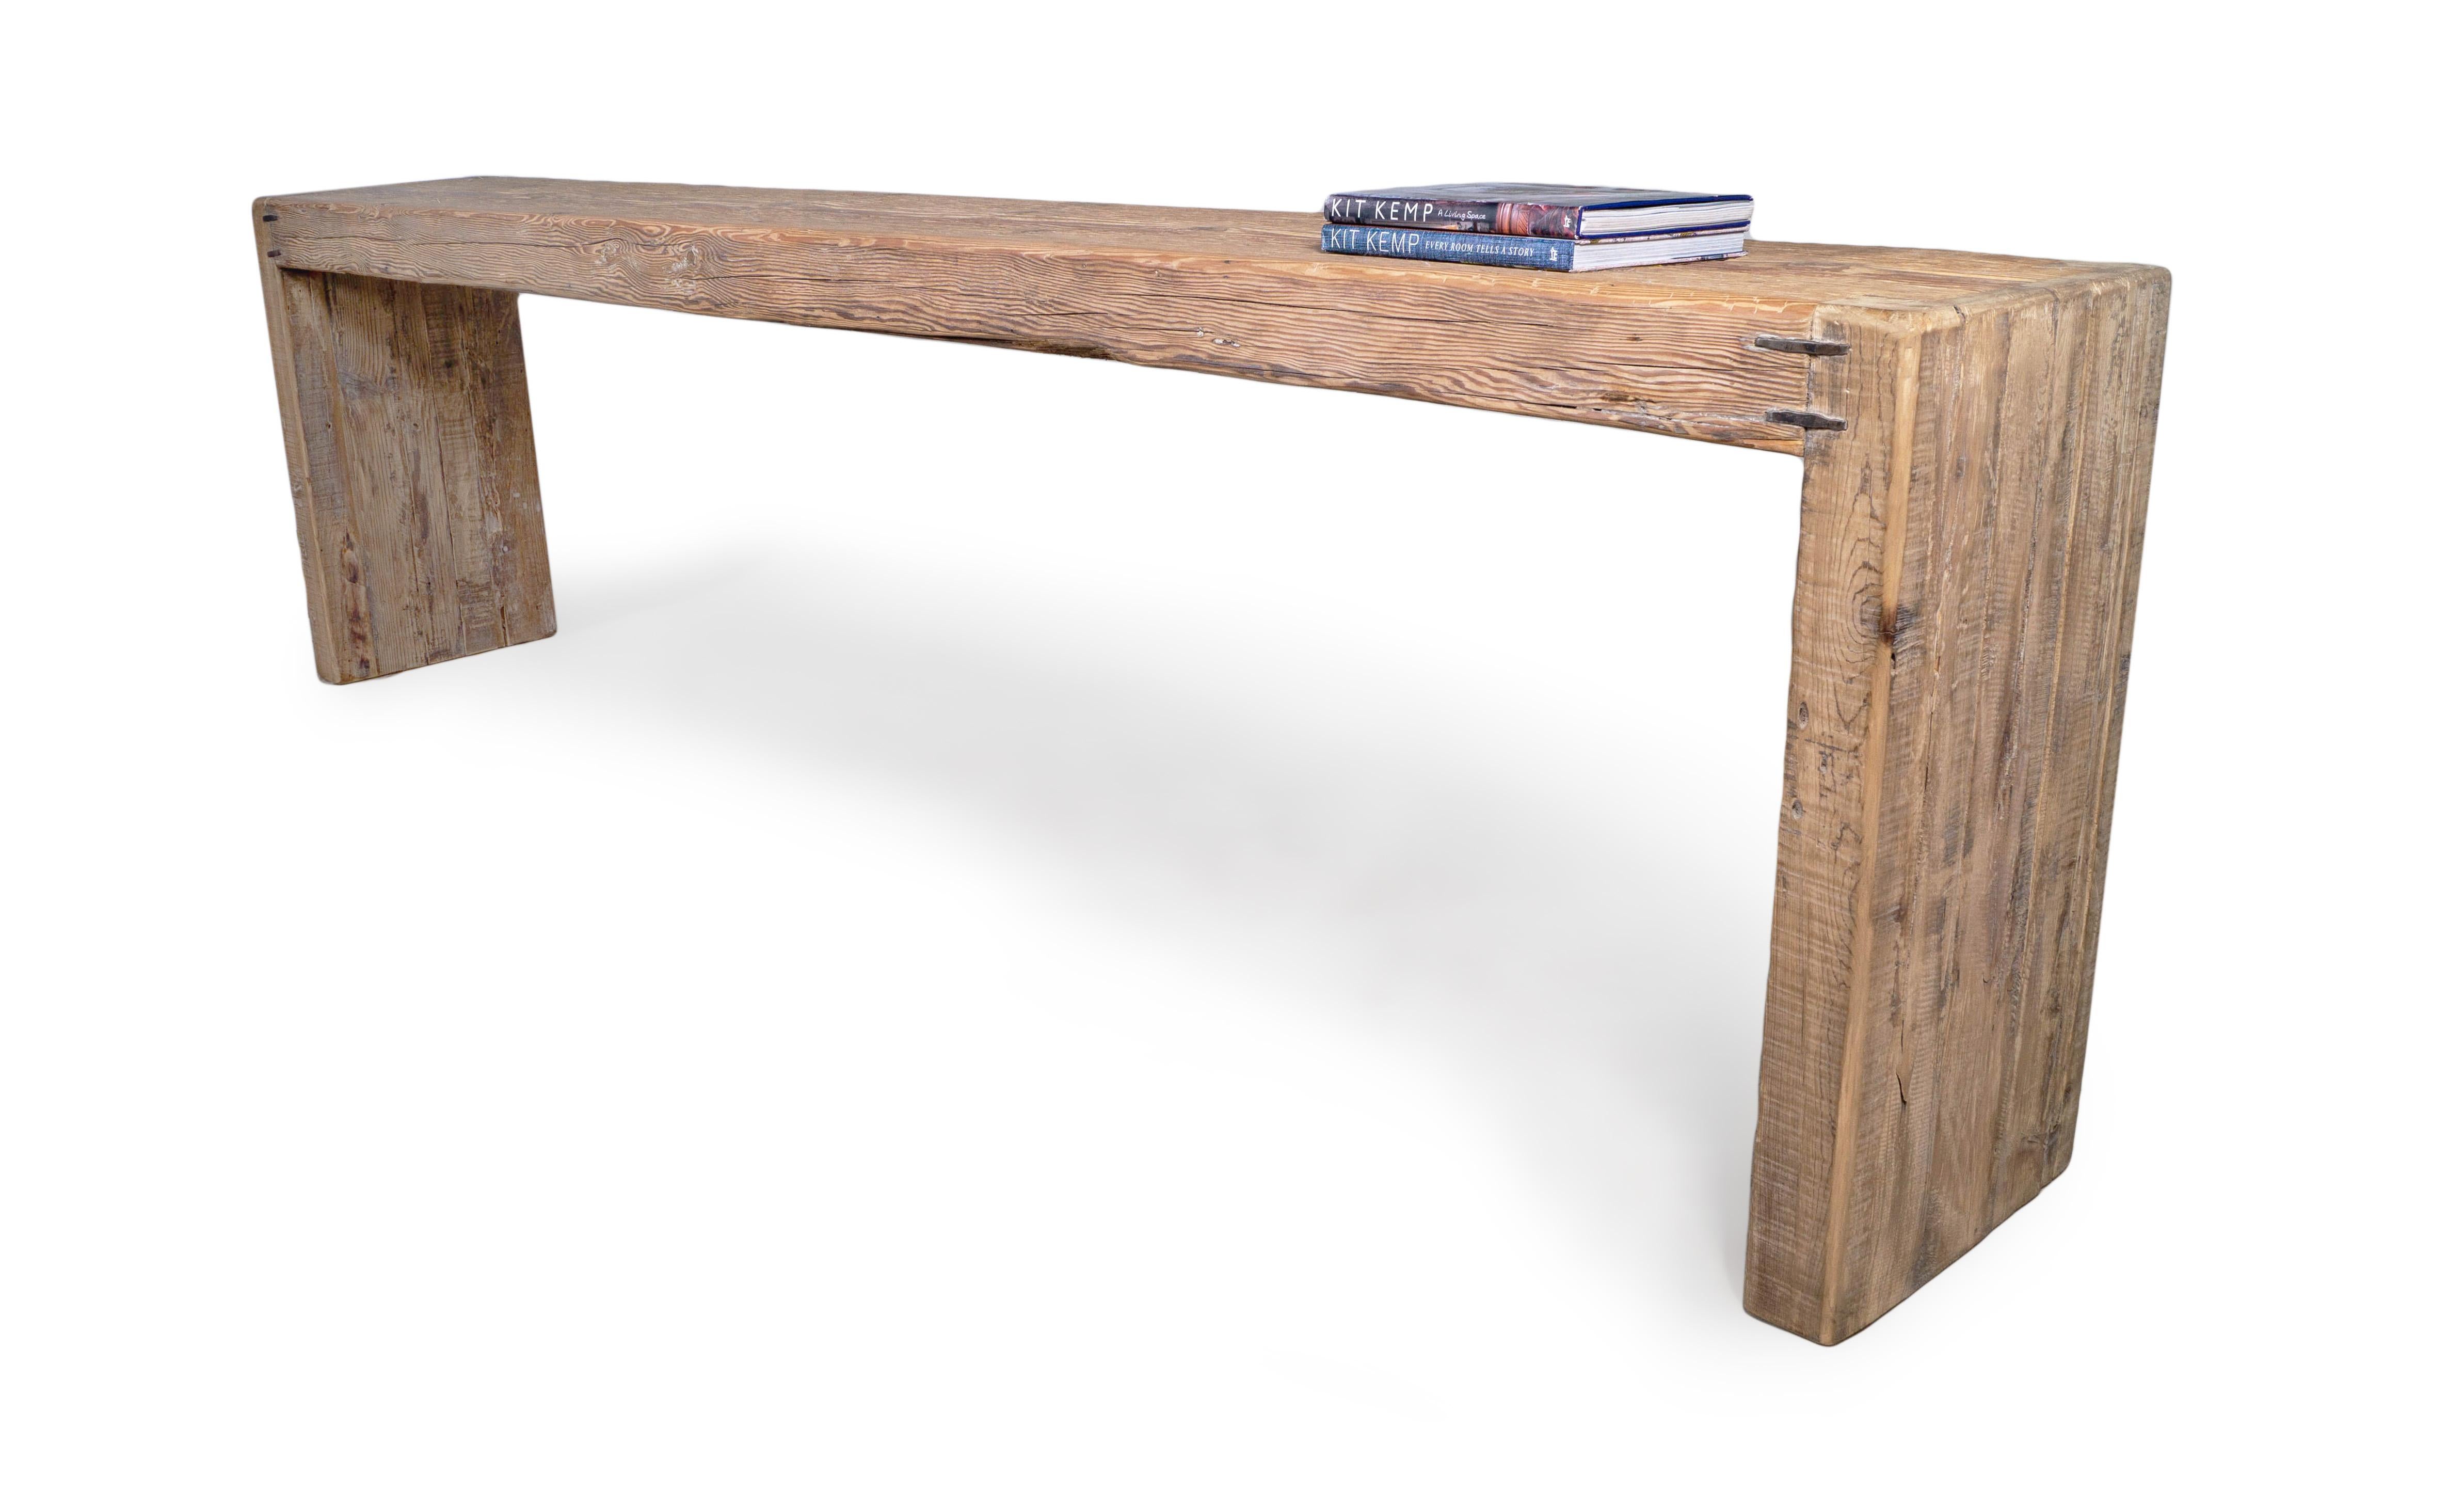 This minimalist provincial serving table in reclaimed elm features a beautiful waterfall design and an organic texture that adds stunning detail and texture to any space. Metal cleats have been added to join the wood, providing added strength and